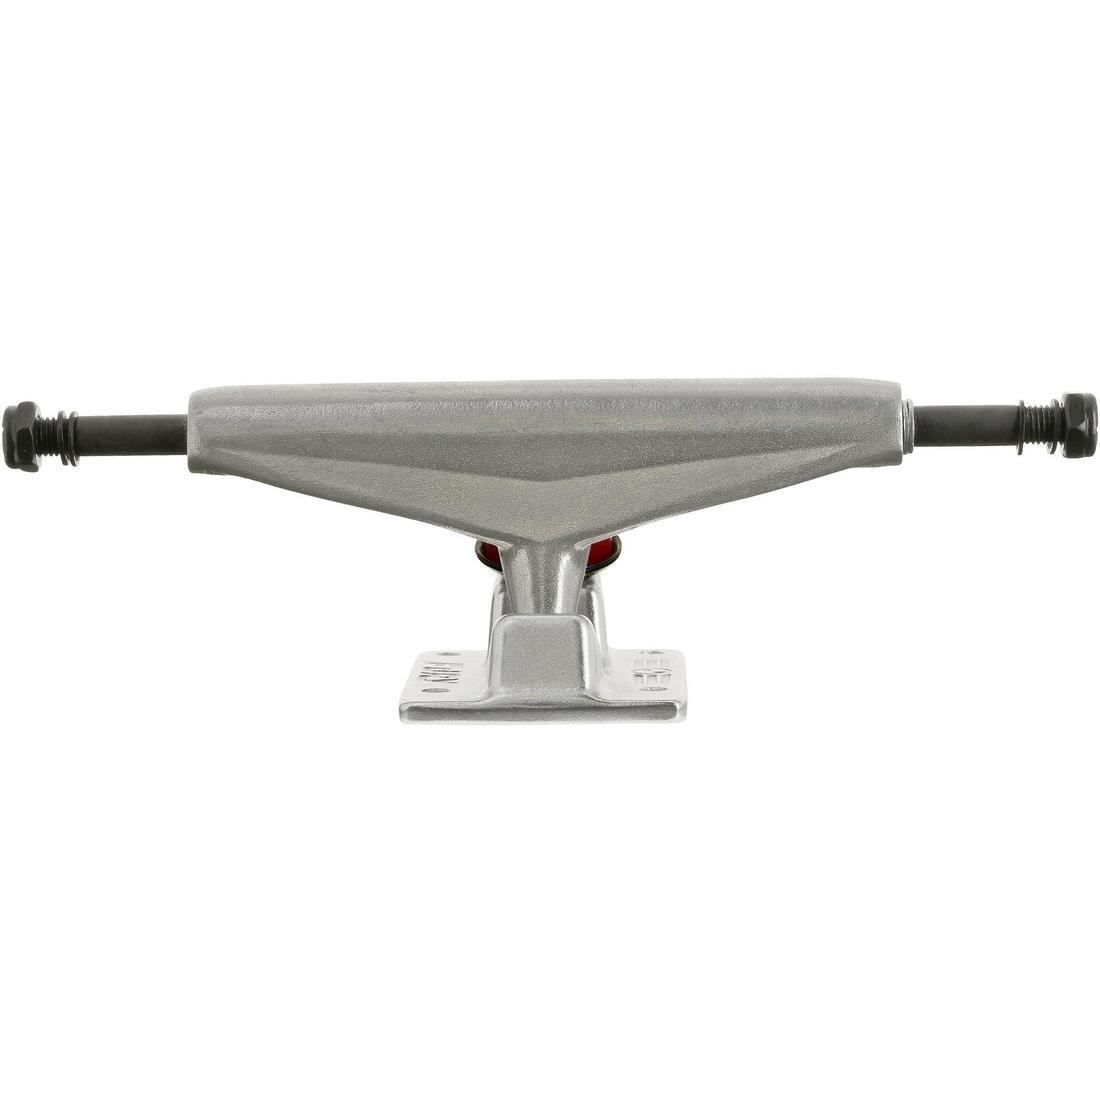 OXELO - Fury Skateboard Forged Baseplate Truck Size 8/20.32 Mm, Grey